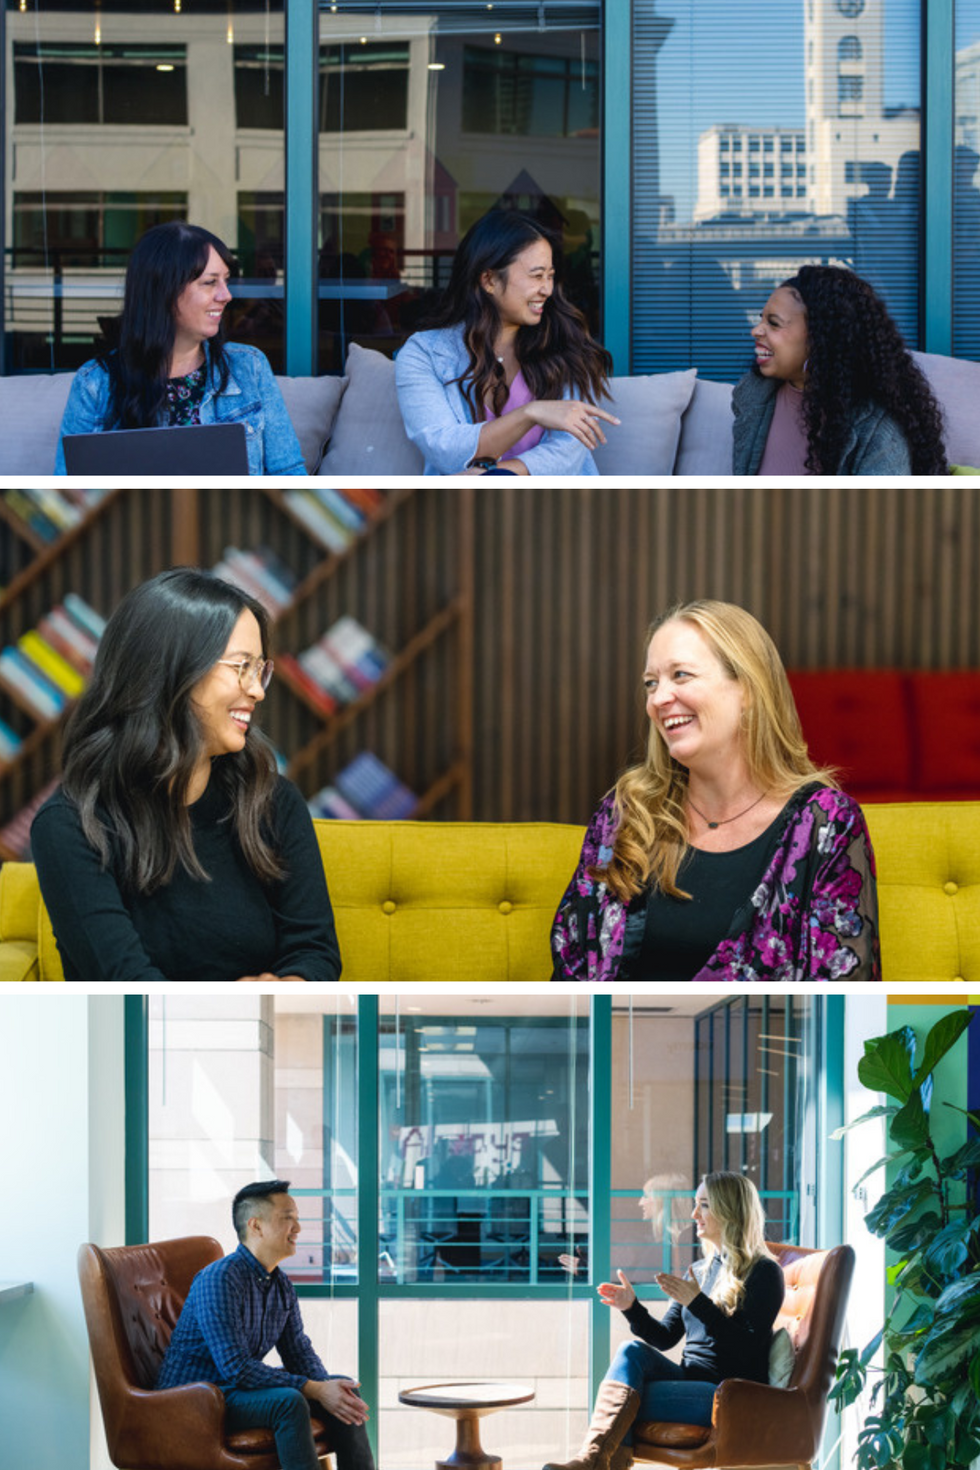 Three images showing various teammates talking in the the Udemy offices